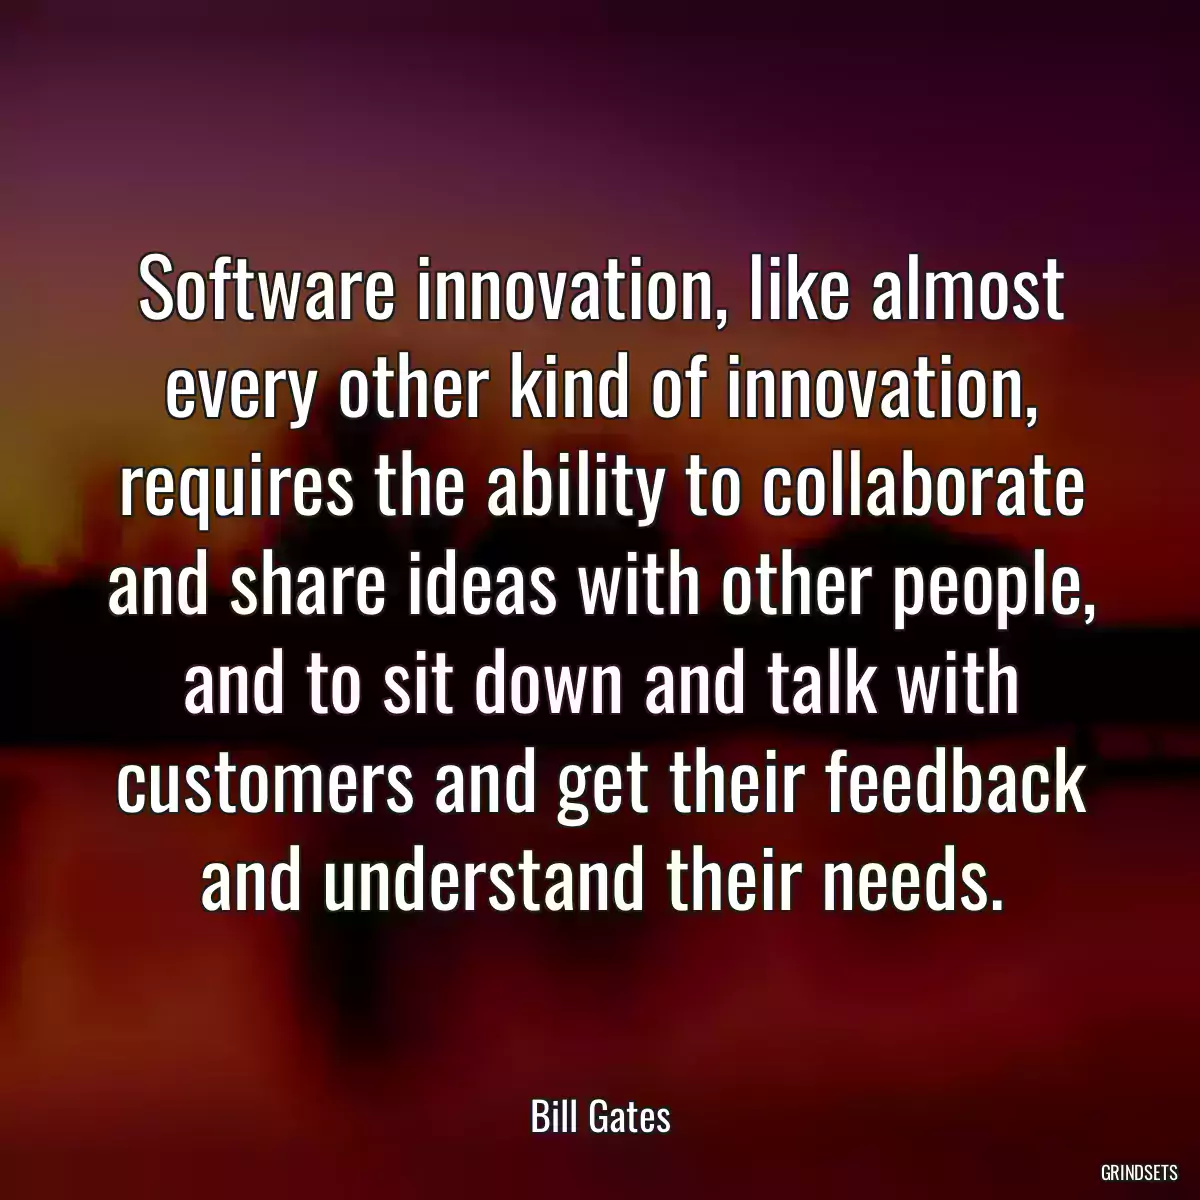 Software innovation, like almost every other kind of innovation, requires the ability to collaborate and share ideas with other people, and to sit down and talk with customers and get their feedback and understand their needs.